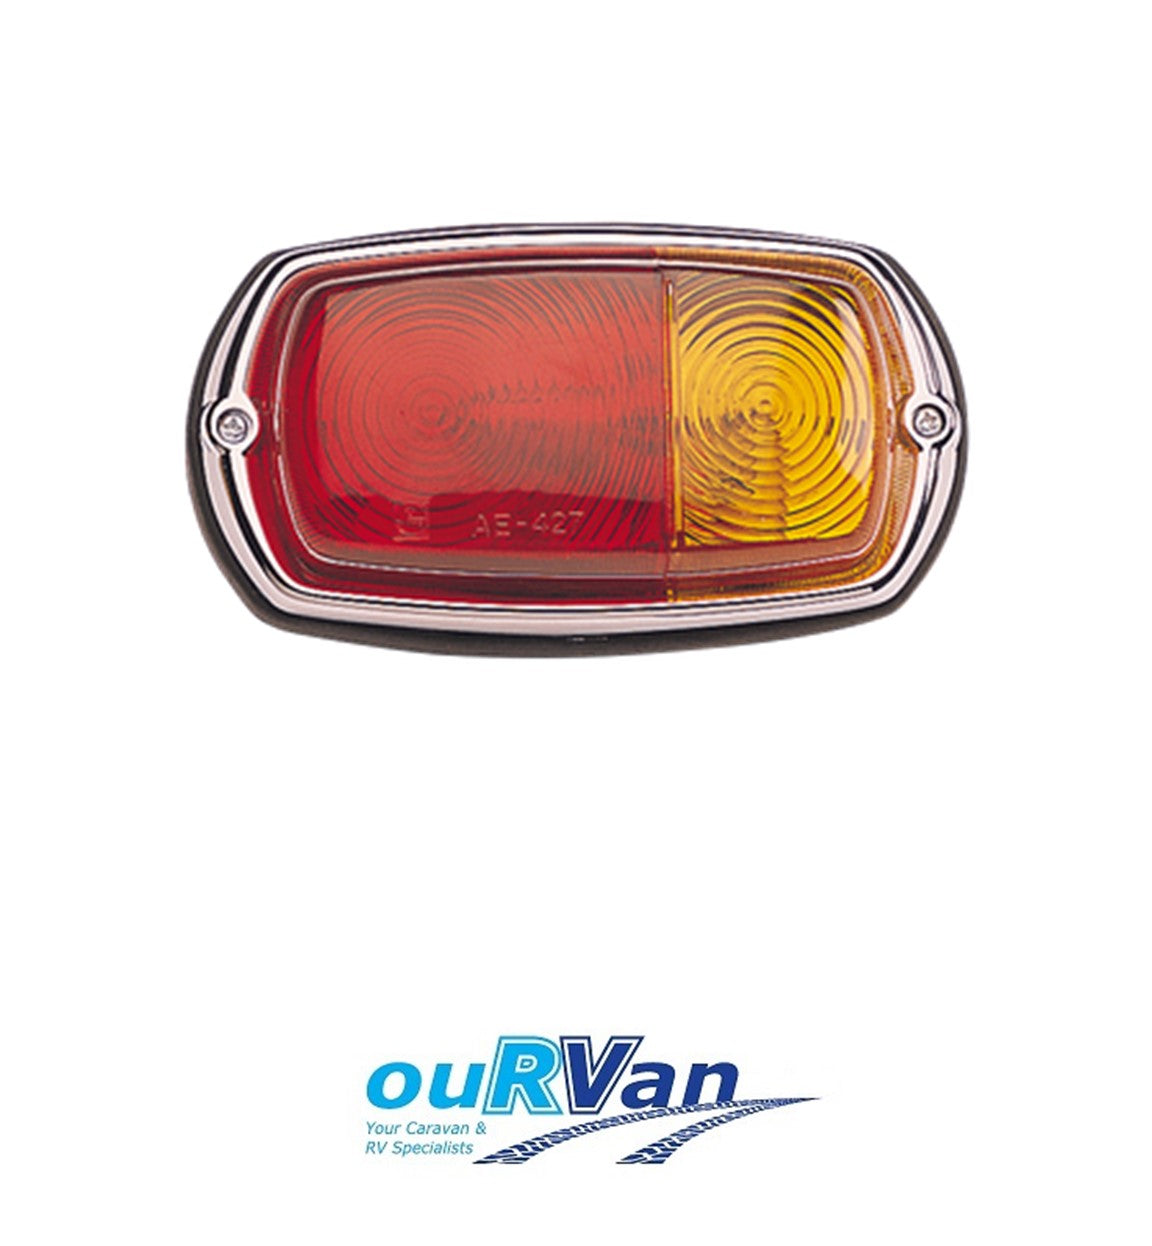 NARVA REAR STOP/TAIL DIRECTION INDICATOR LAMP (RED/AMBER) (BLISTER PACK OF 1) 86010BL